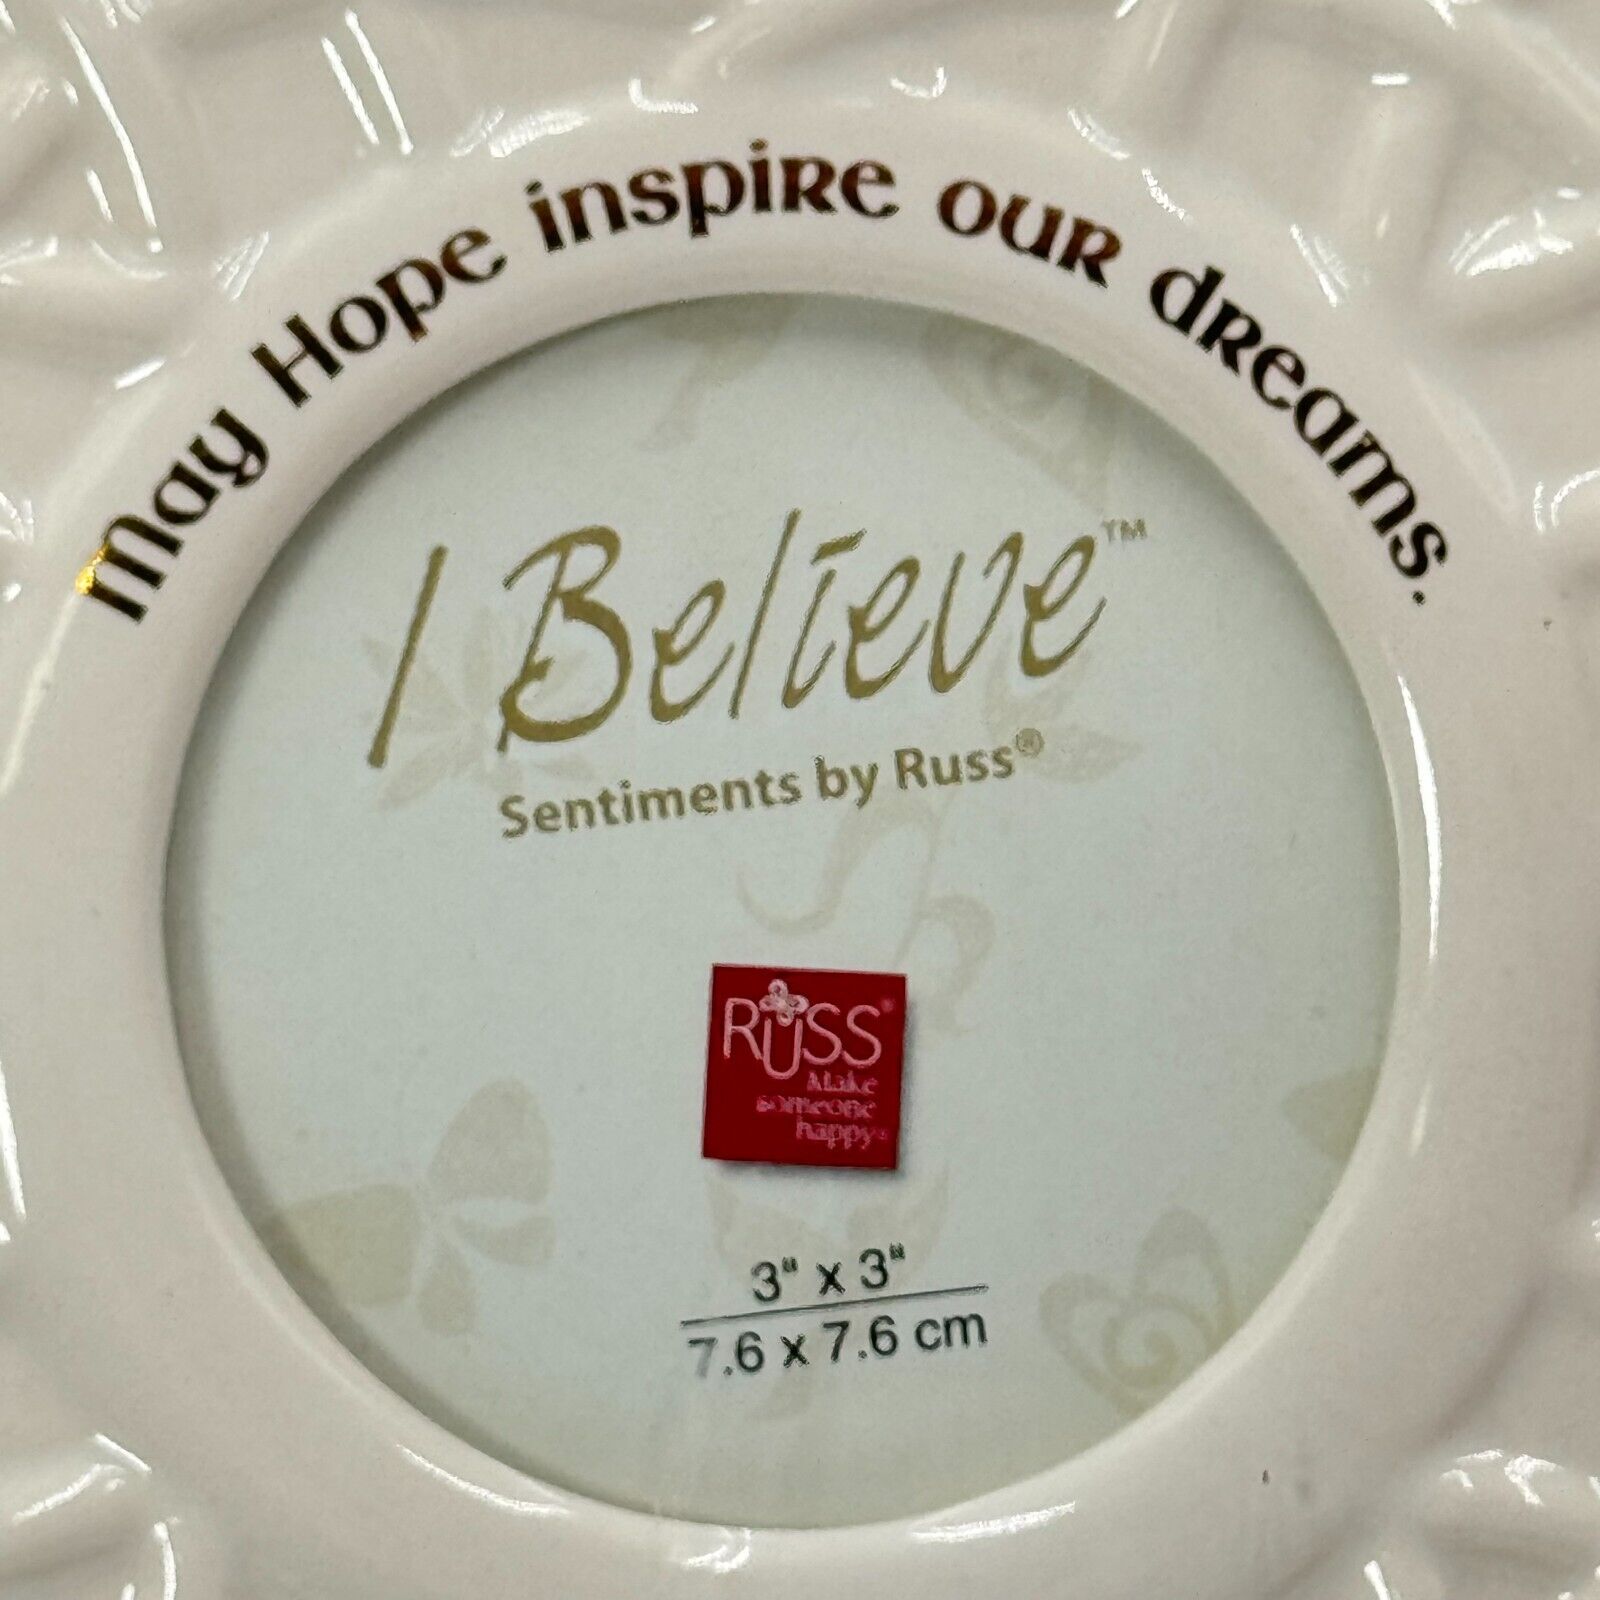 Believe Hope Inspire Dream Sentiments by Russ 3x3in Round Photo Frame New in Box